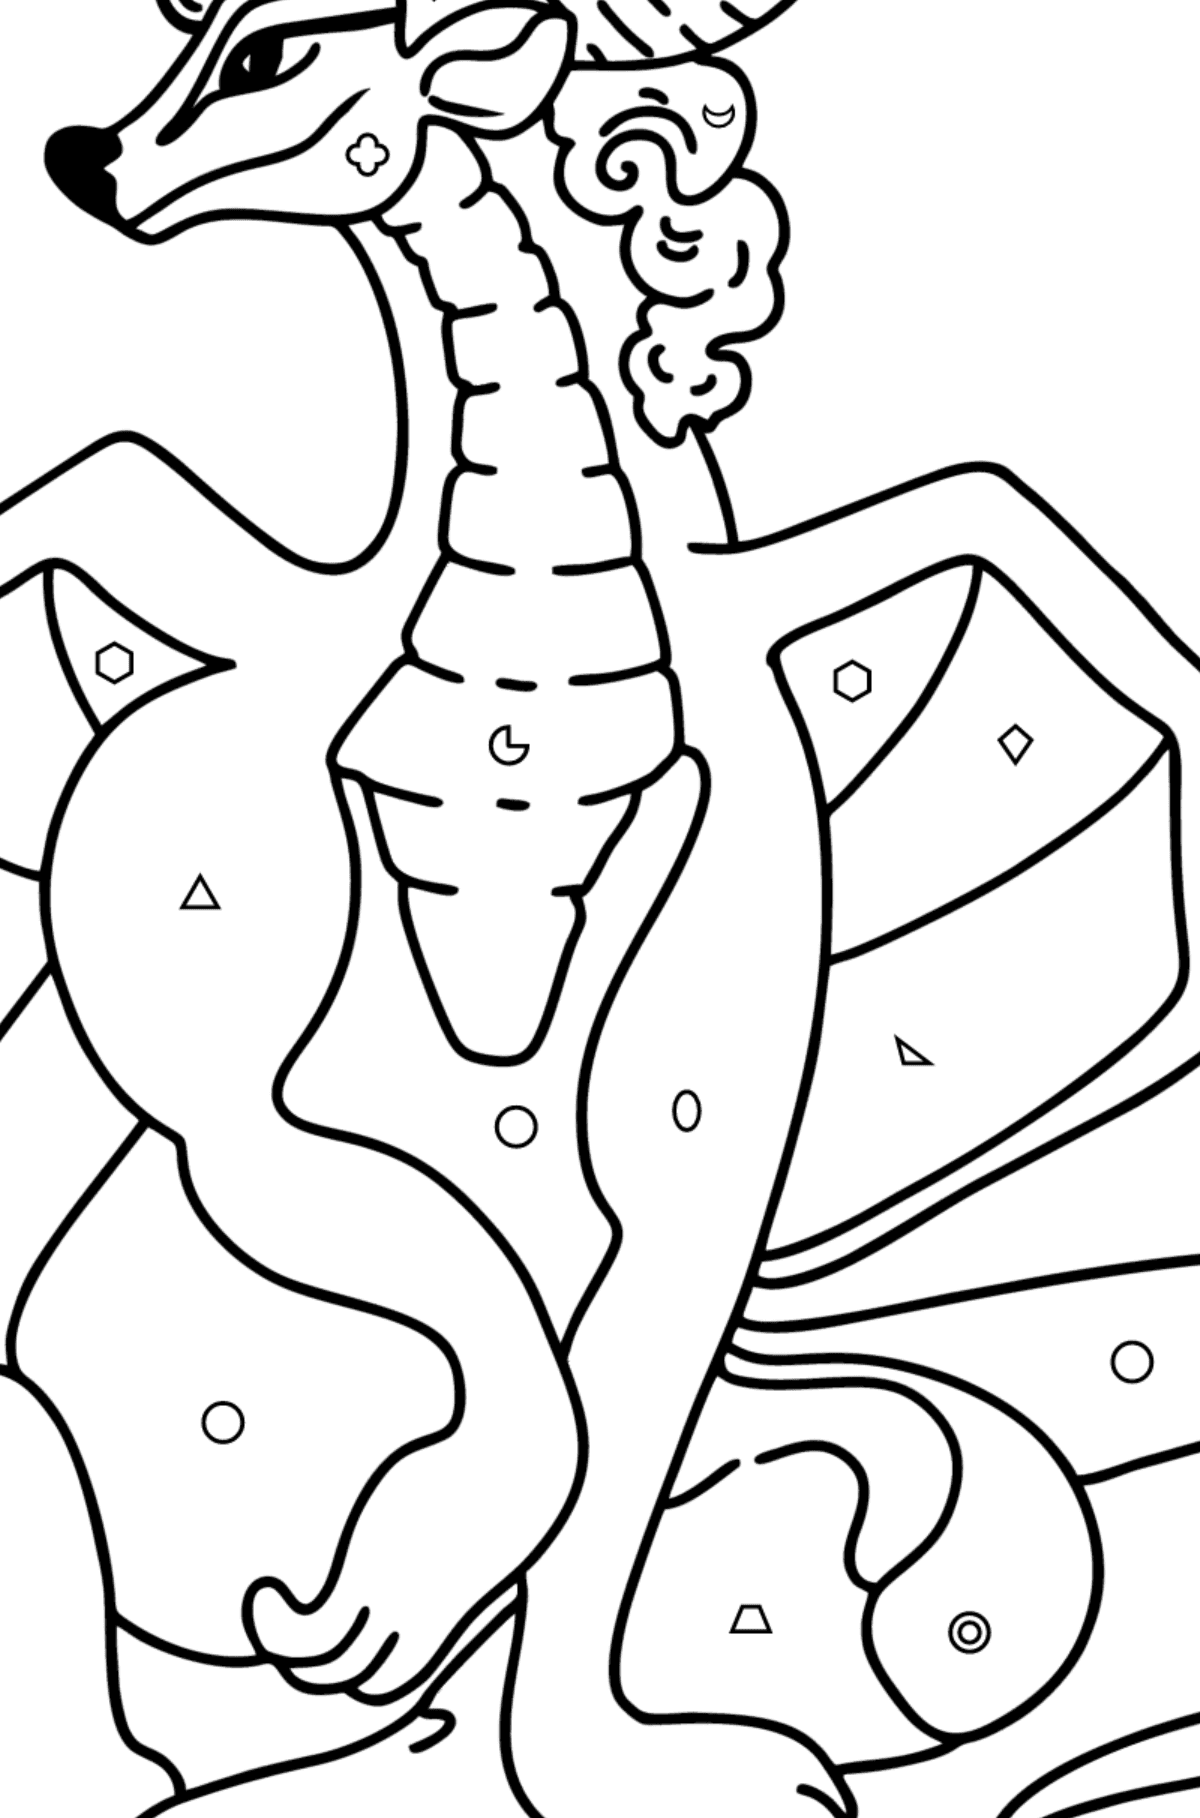 Happy Dragon coloring page - Coloring by Geometric Shapes for Kids